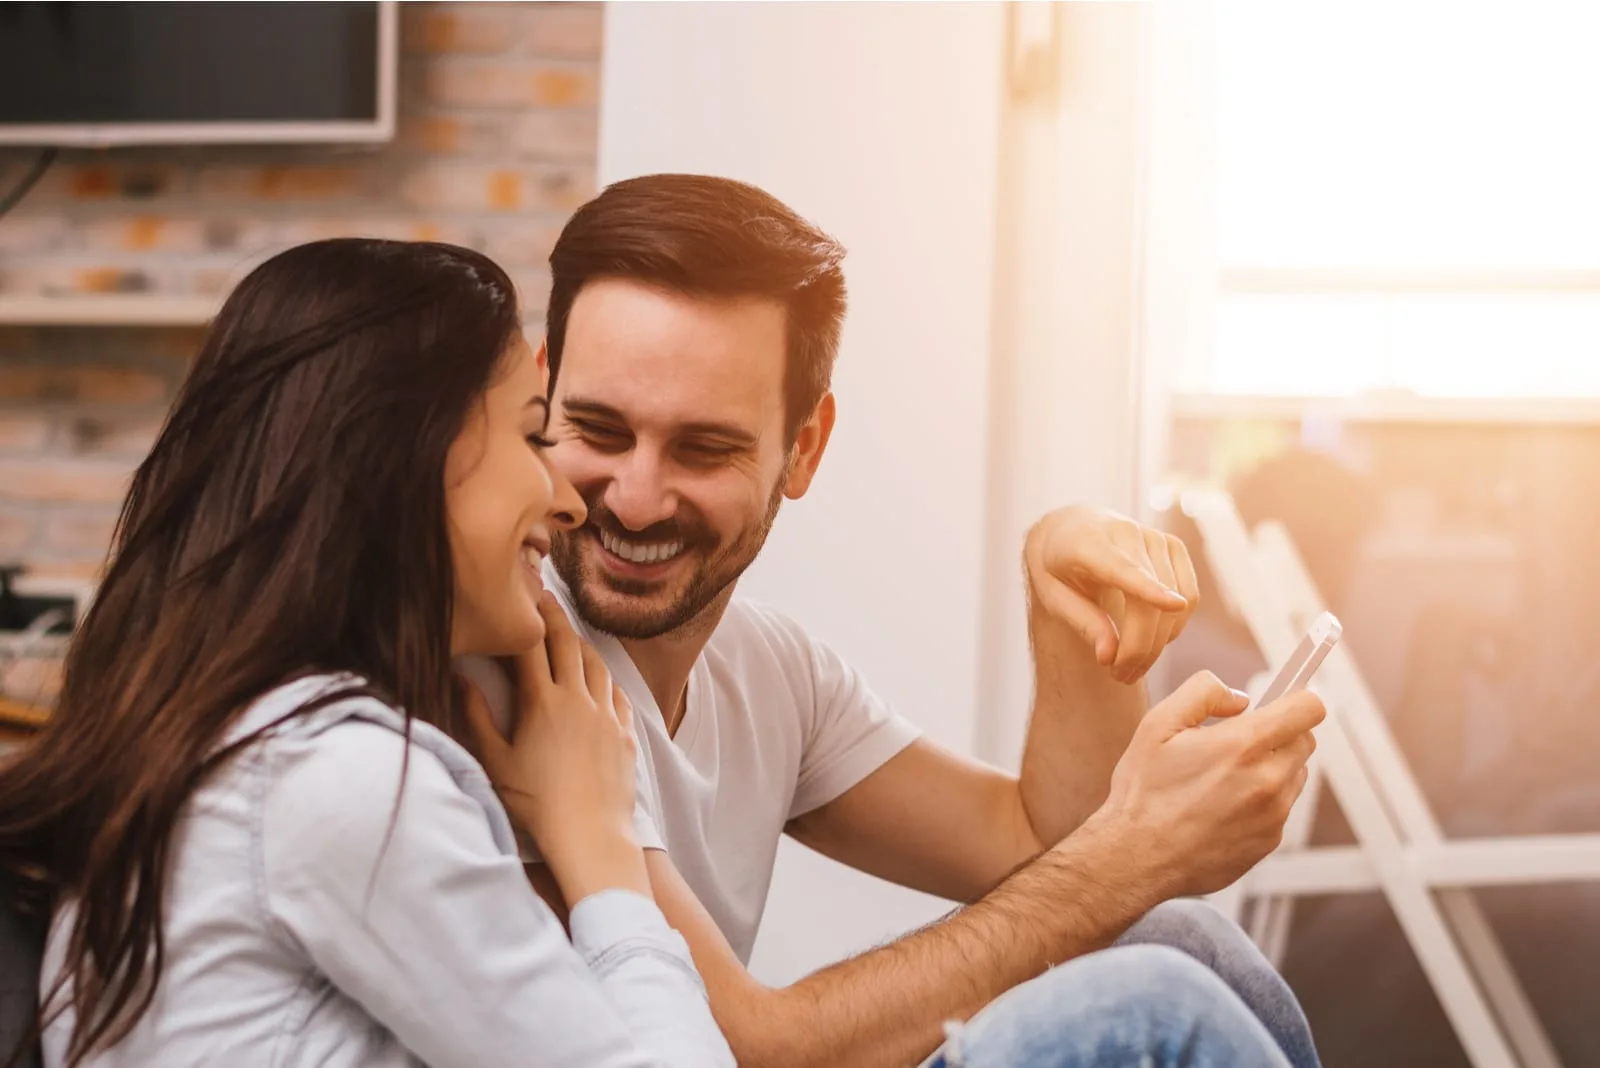 smiling man talking to woman and showing the phone